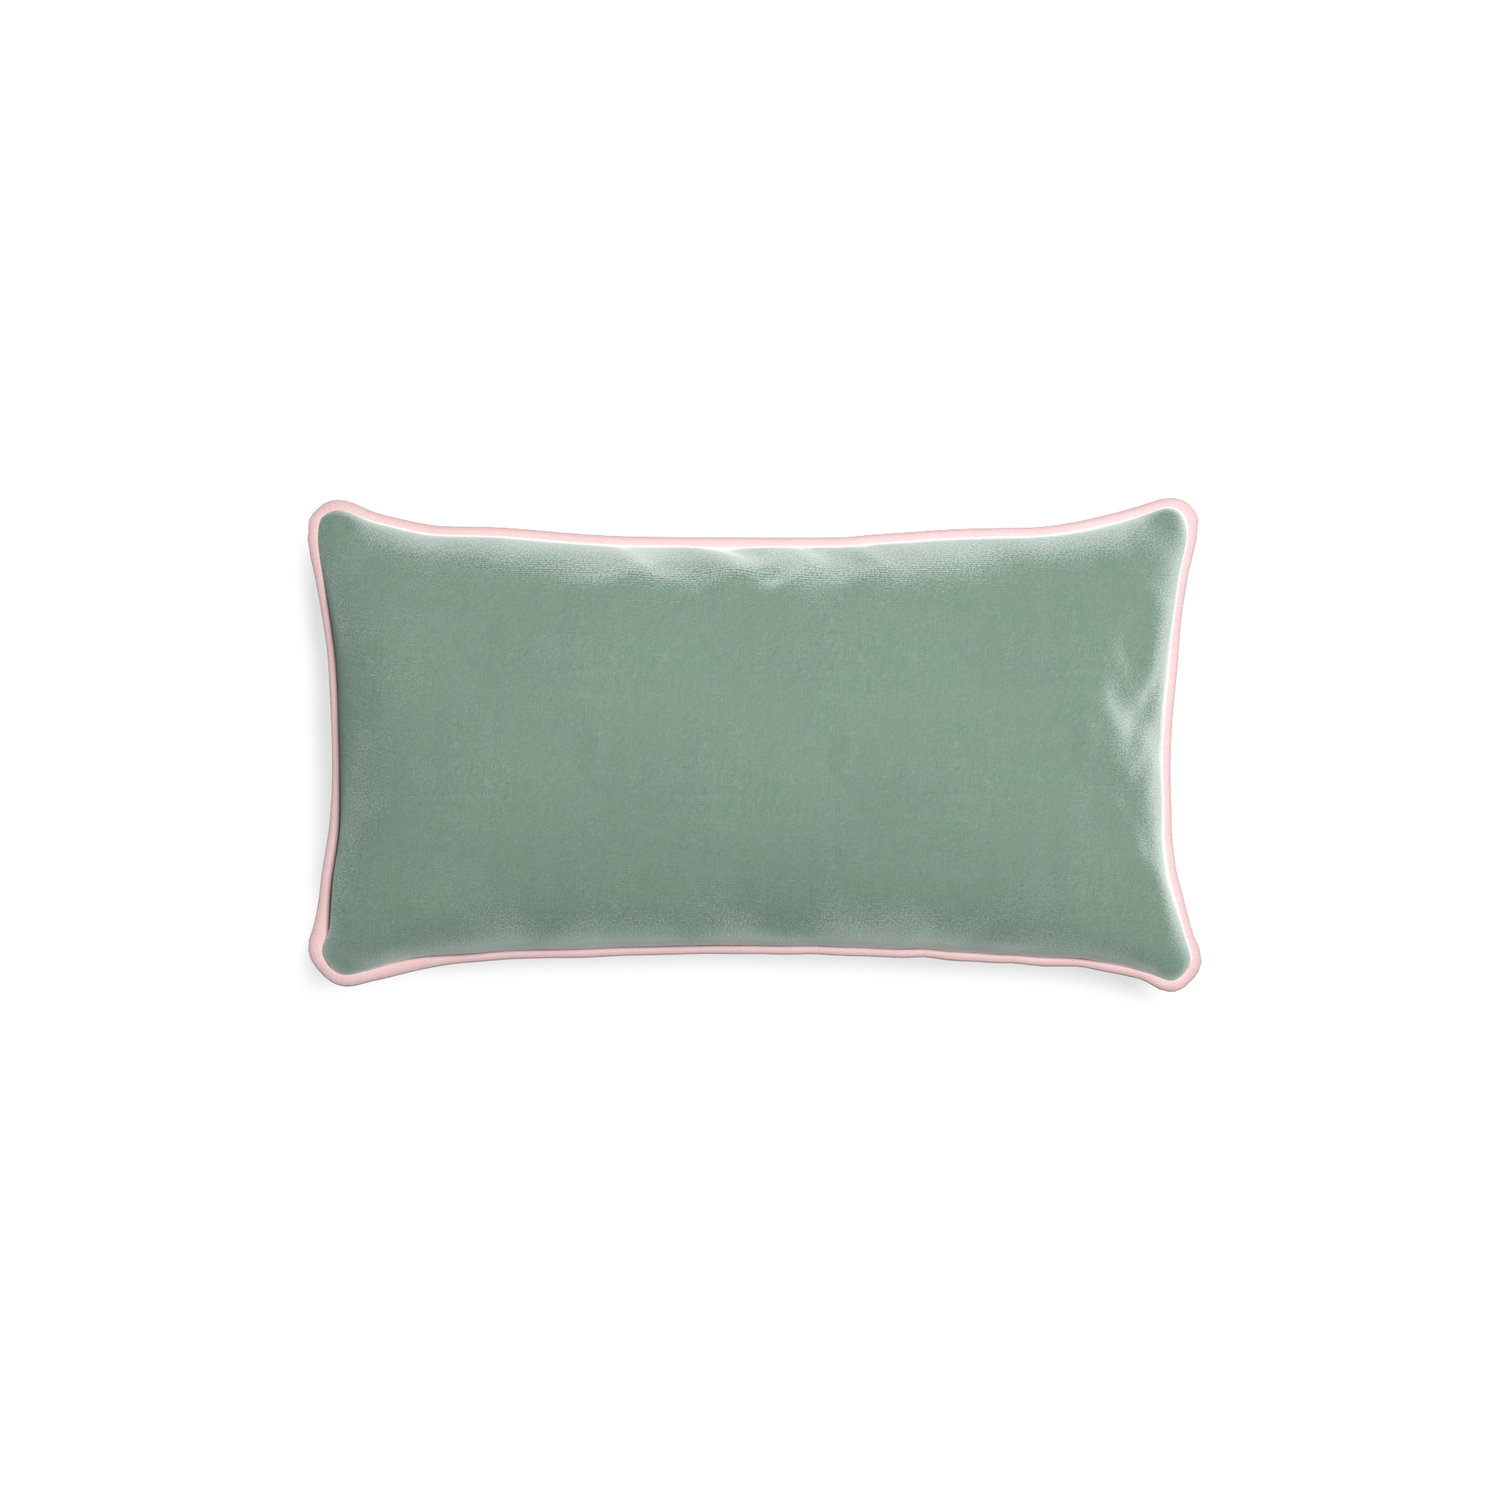 rectangle blue green velvet pillow with light pink piping